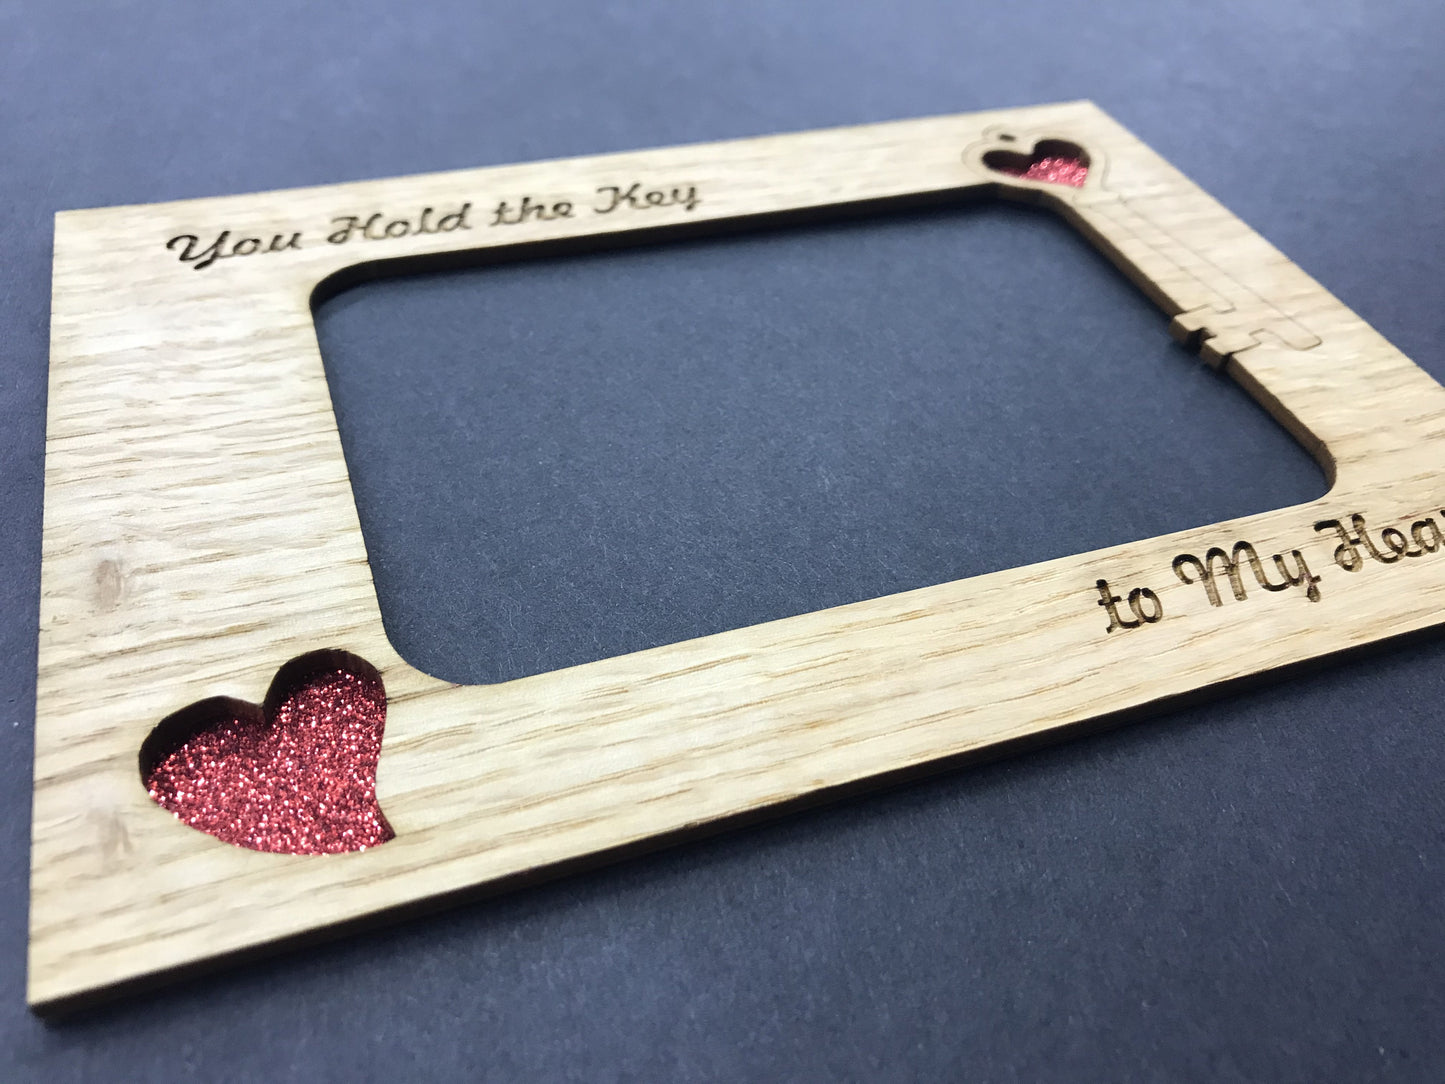 Key To My Heart Picture Frame - 5x7 Frame Hold 4x6 Photo